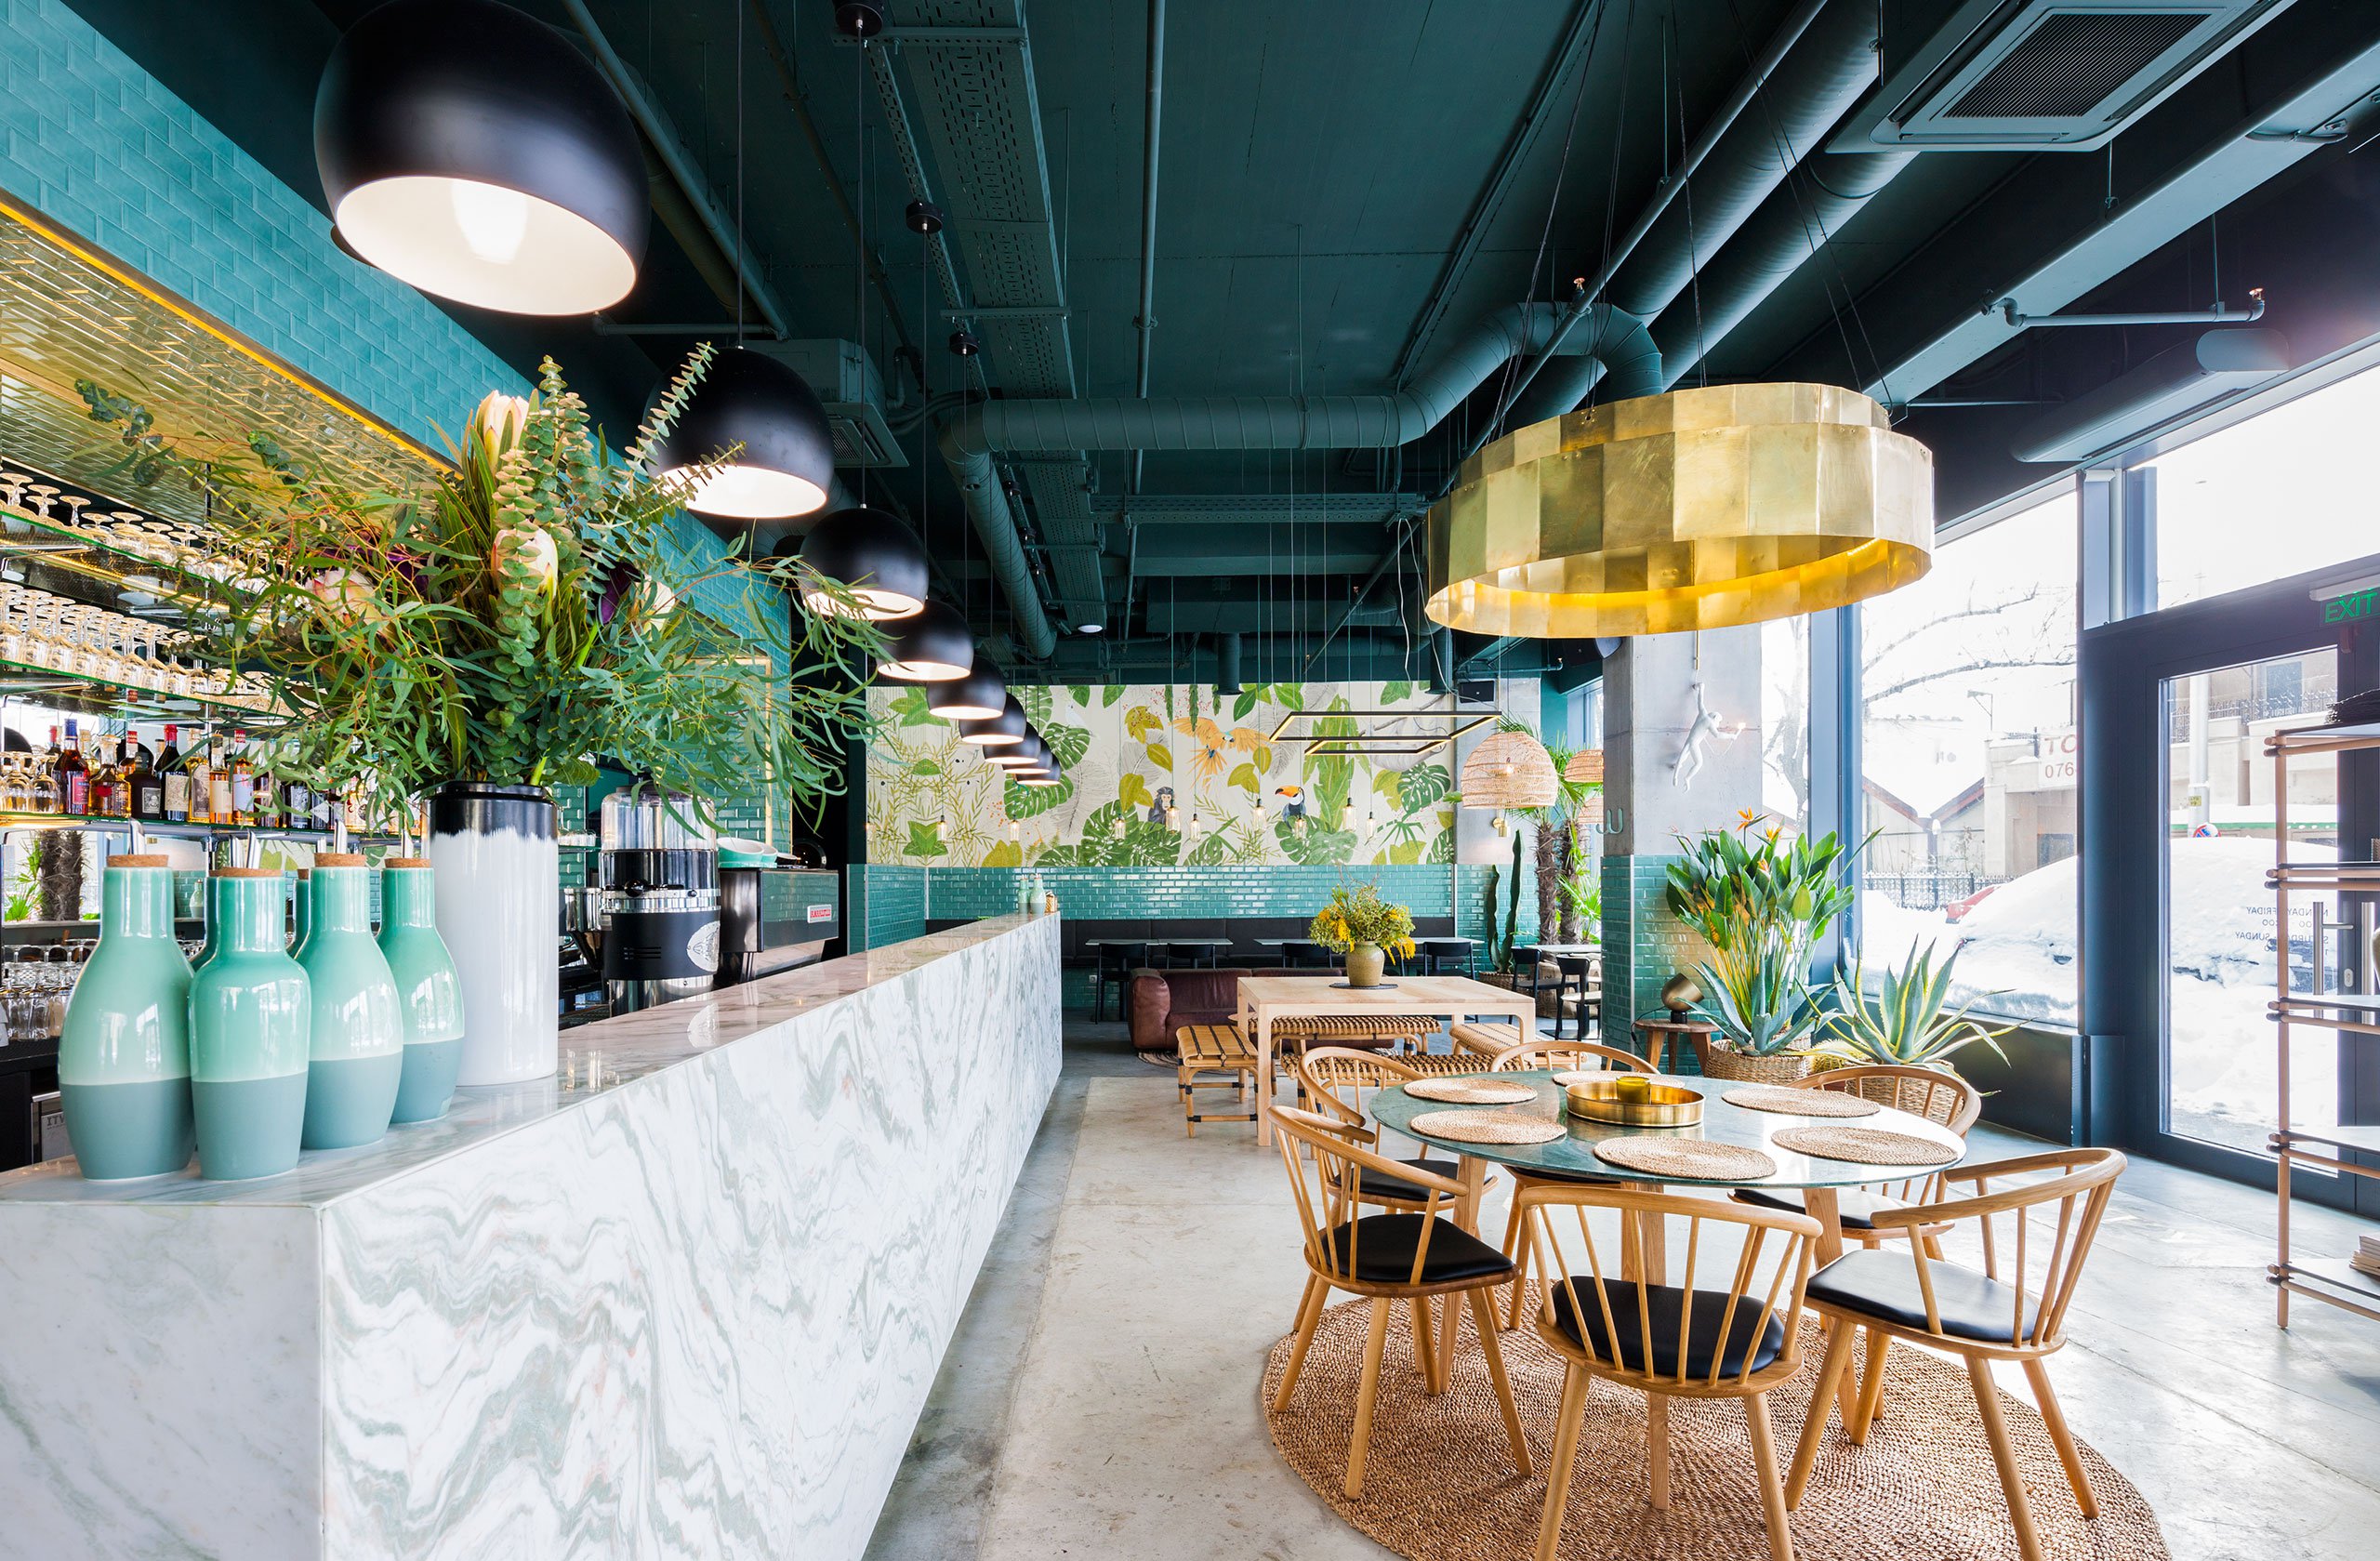 Industrial Style Restaurant with a Greenery-Themed Decor 1